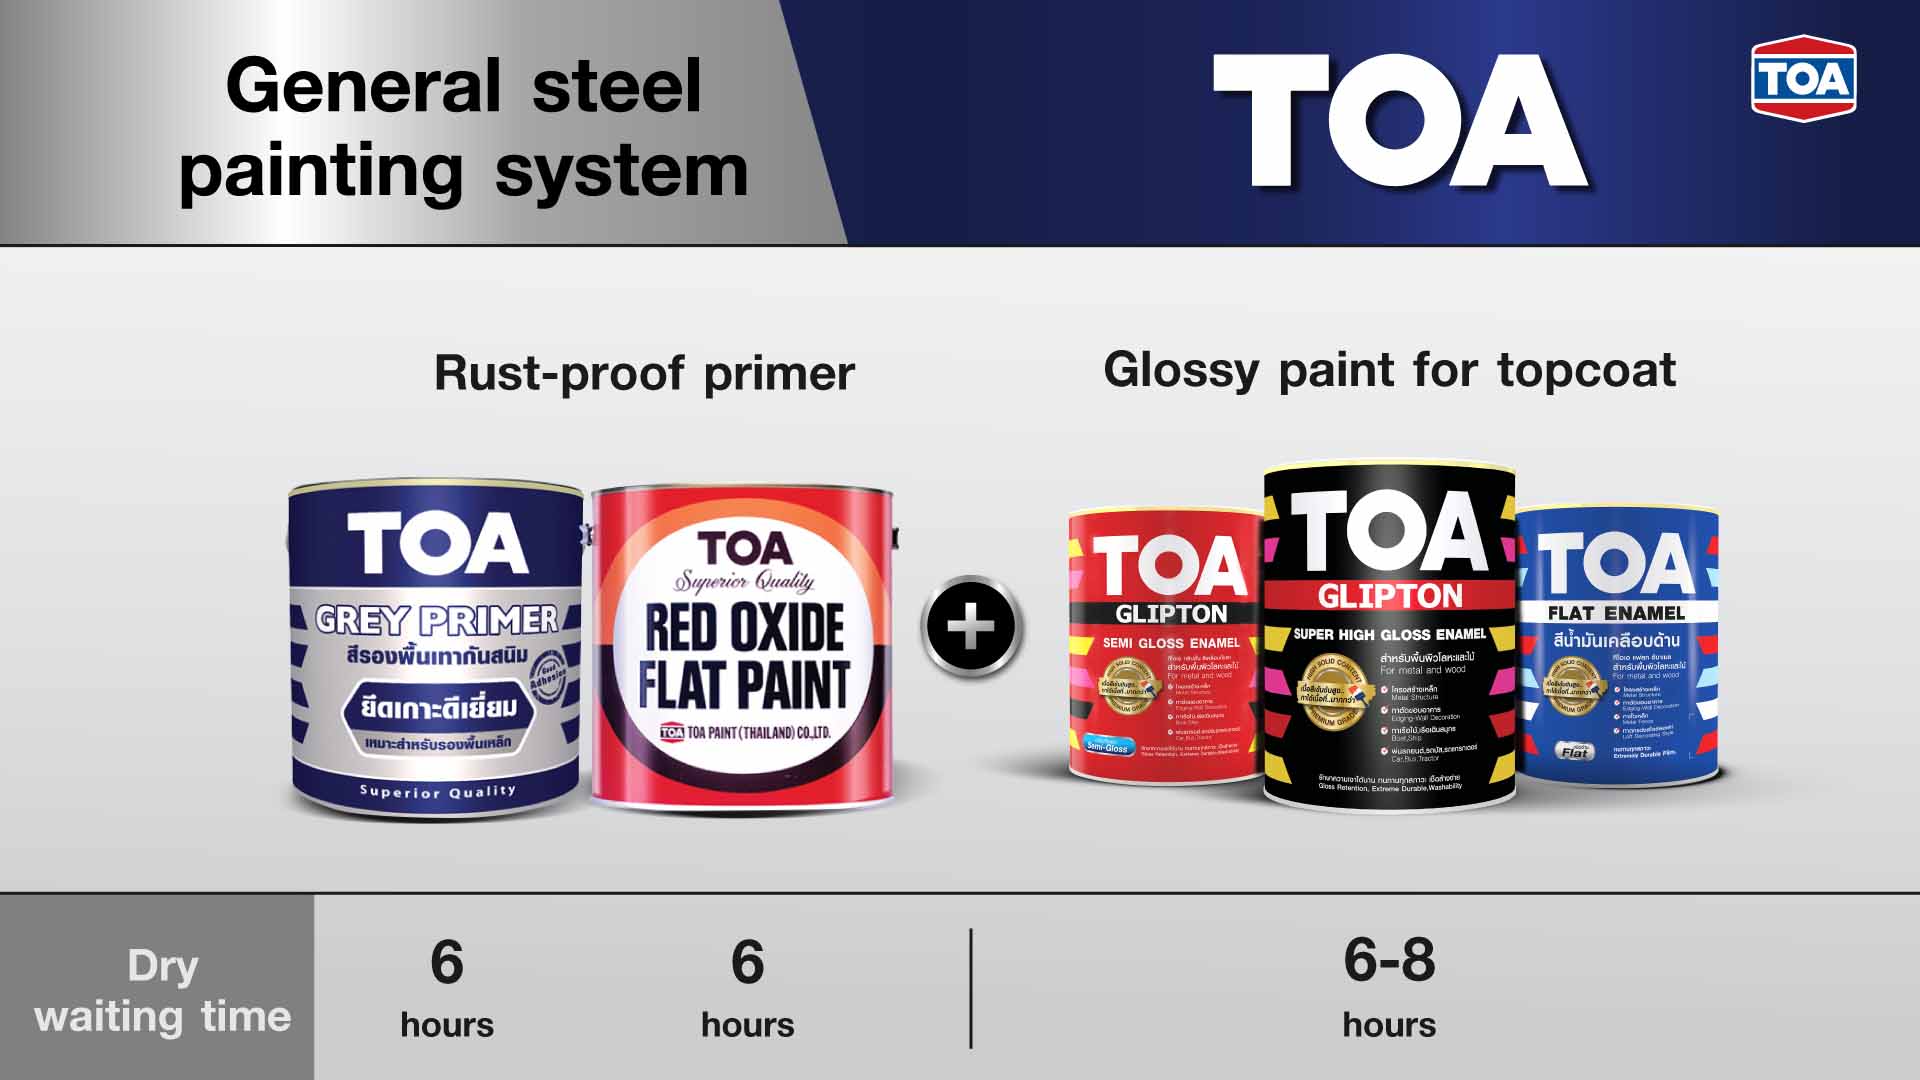 General Steel painting system of TOA Products